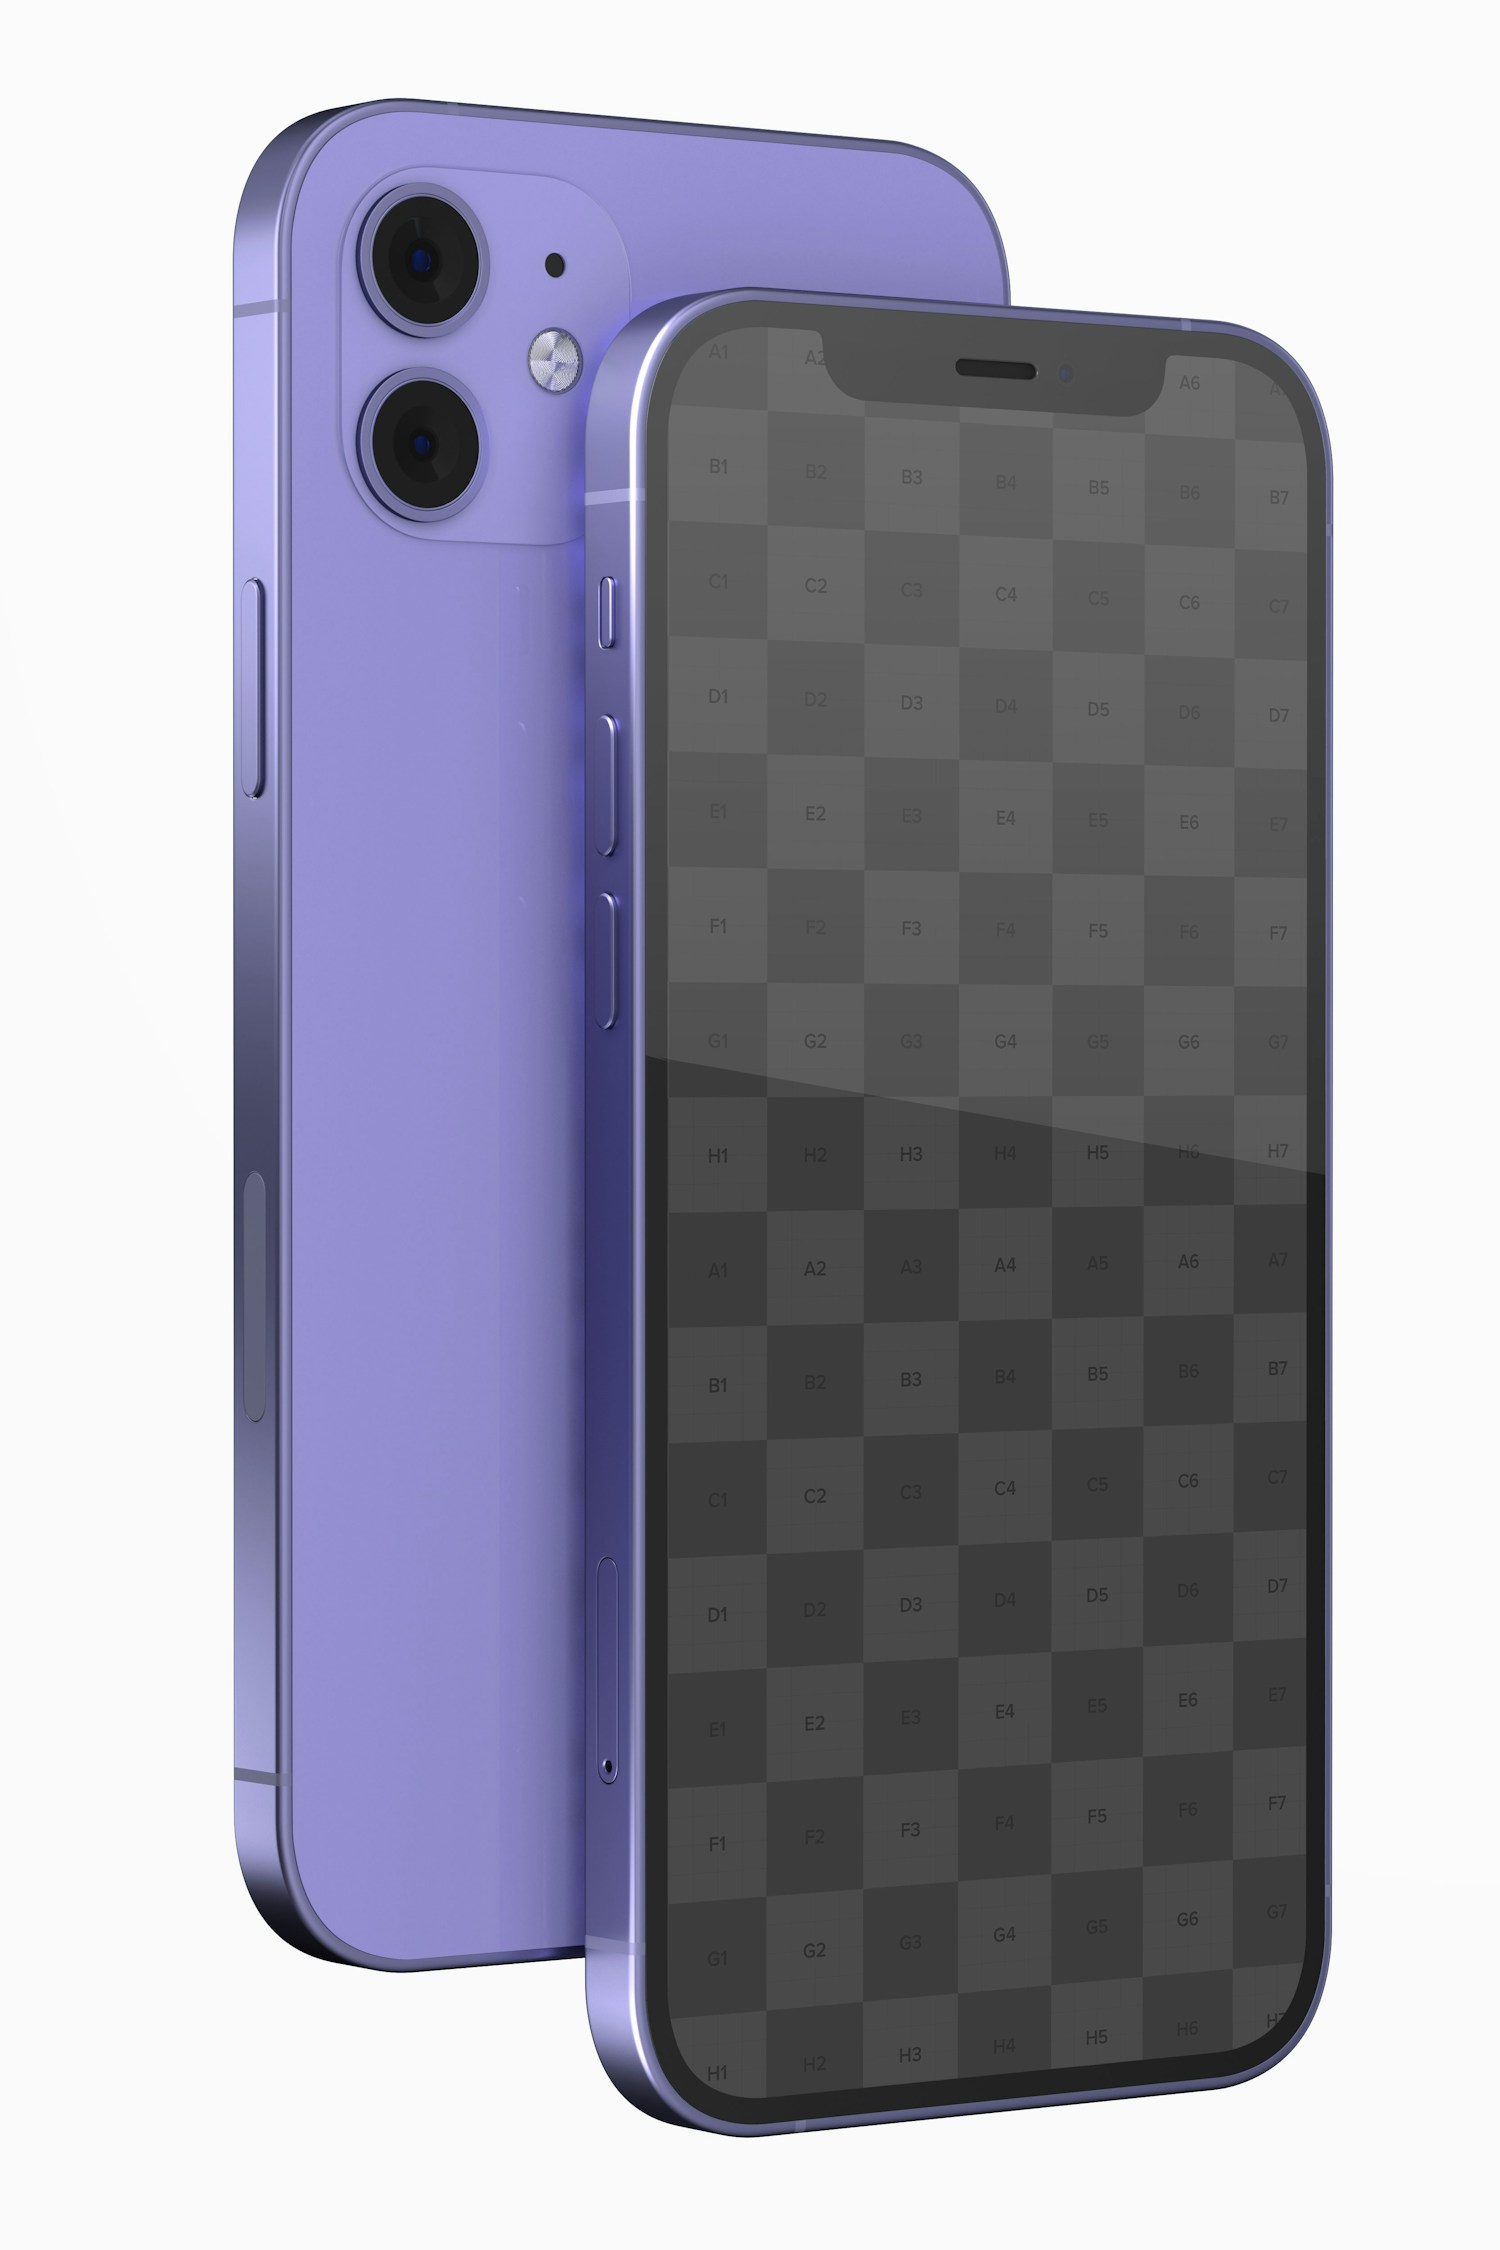 iPhone 12 Purple Version Mockup, Front and Back View